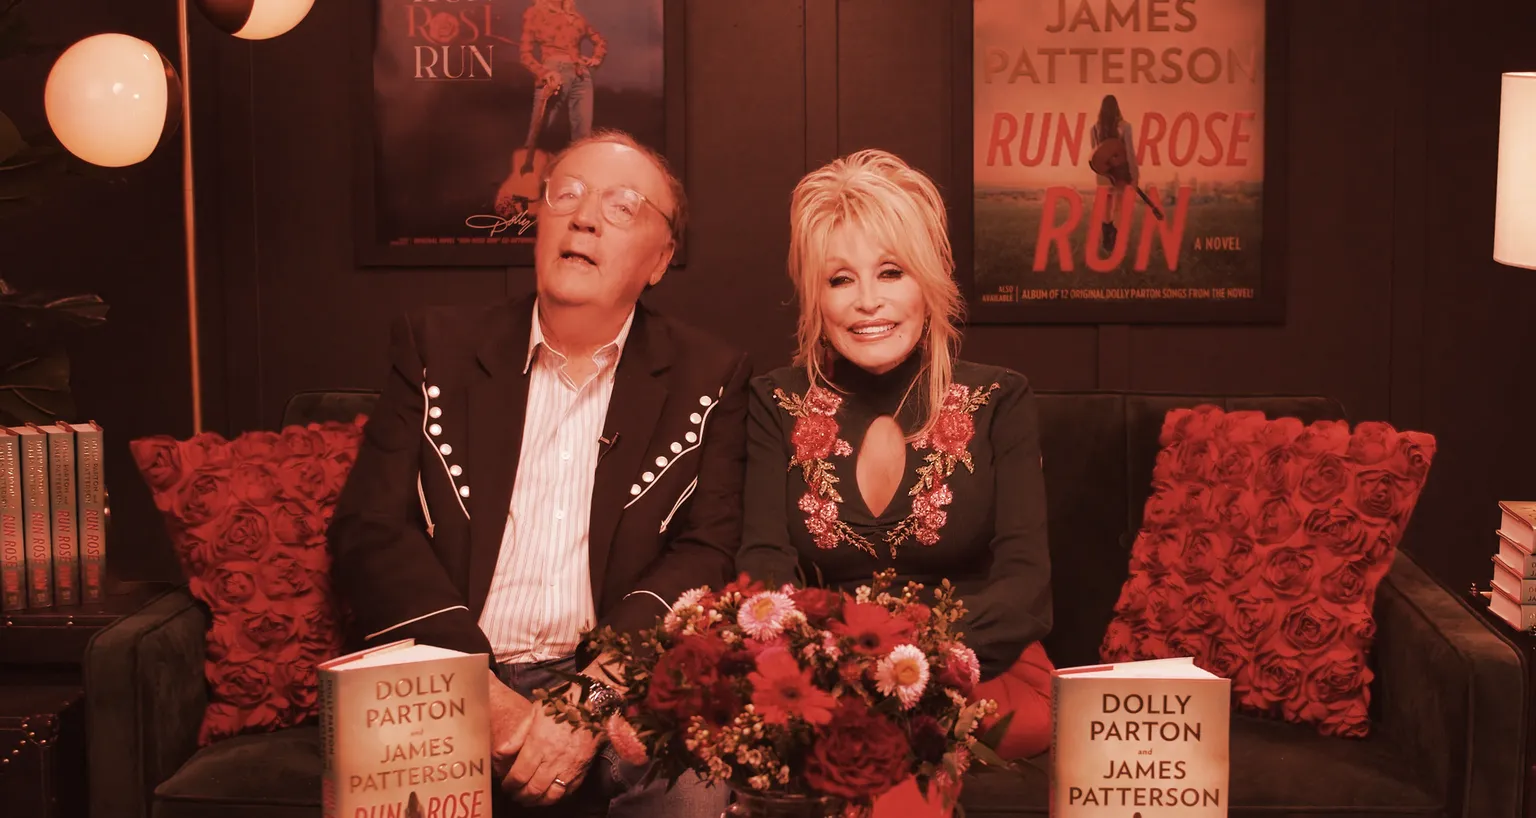 Dolly Parton and James Patterson. Image: Dollyverse